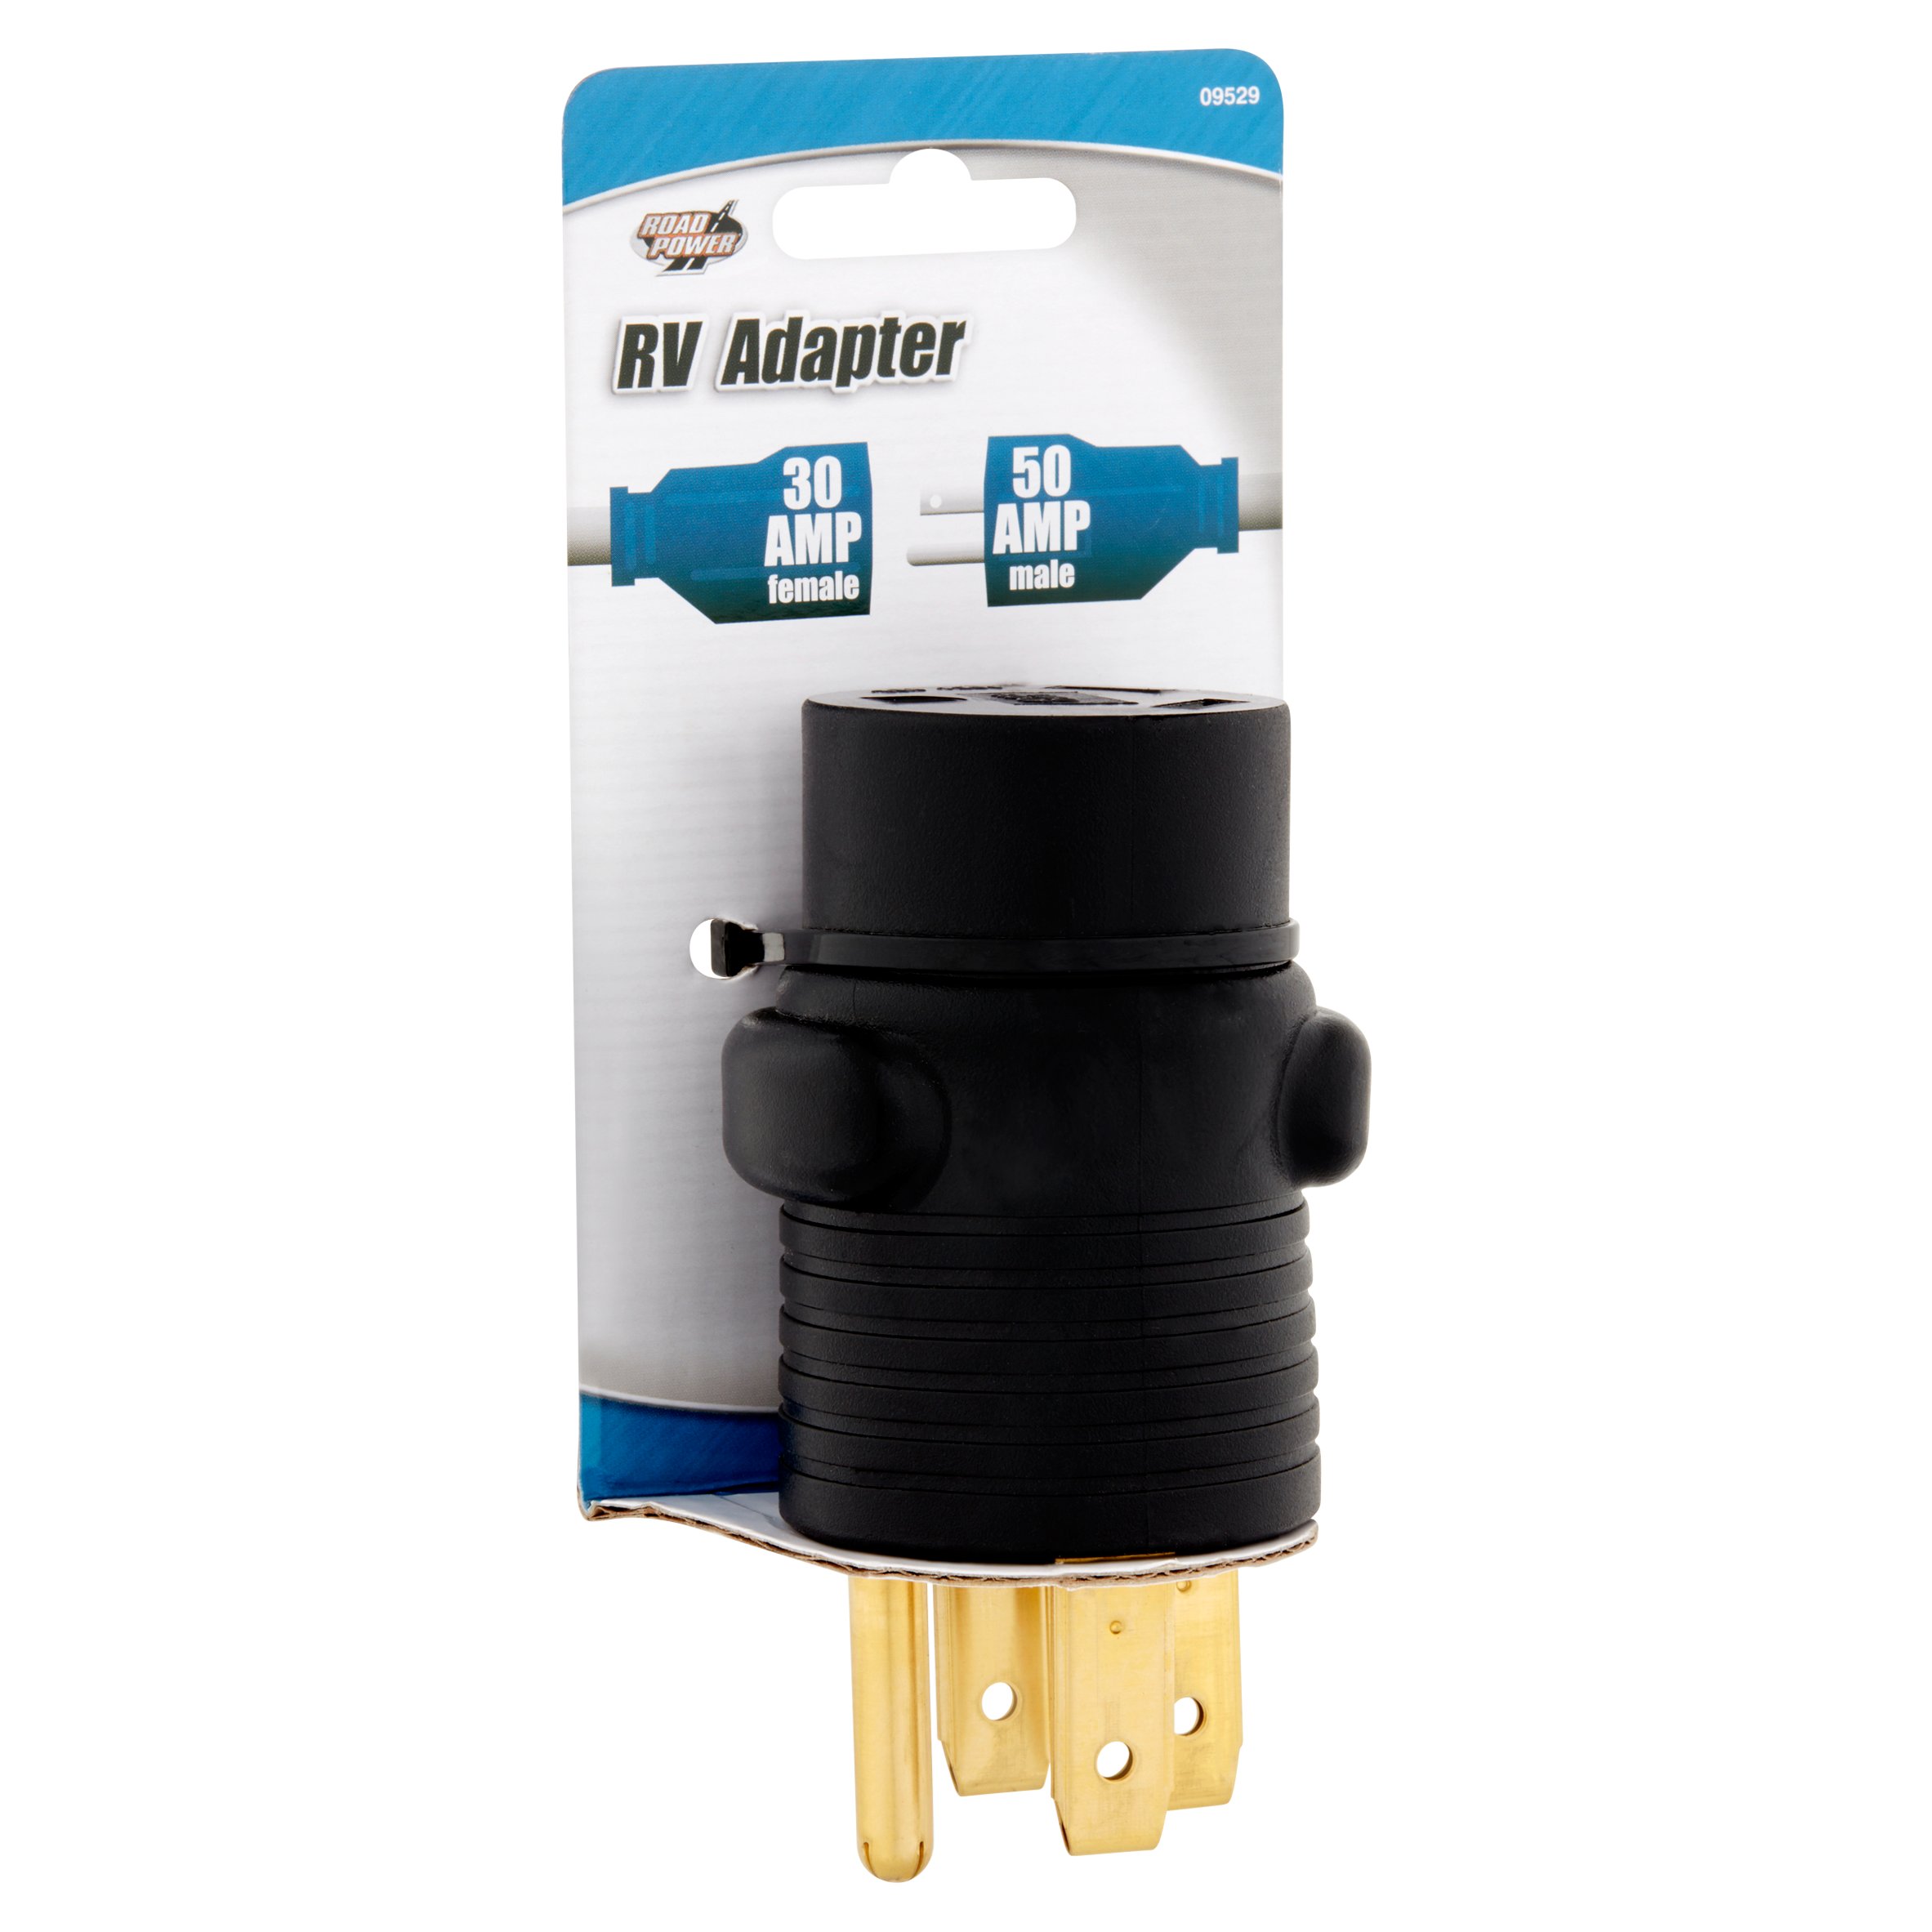 Road Power 30 Amp Female 50 Amp Male RV Adapter - image 2 of 4